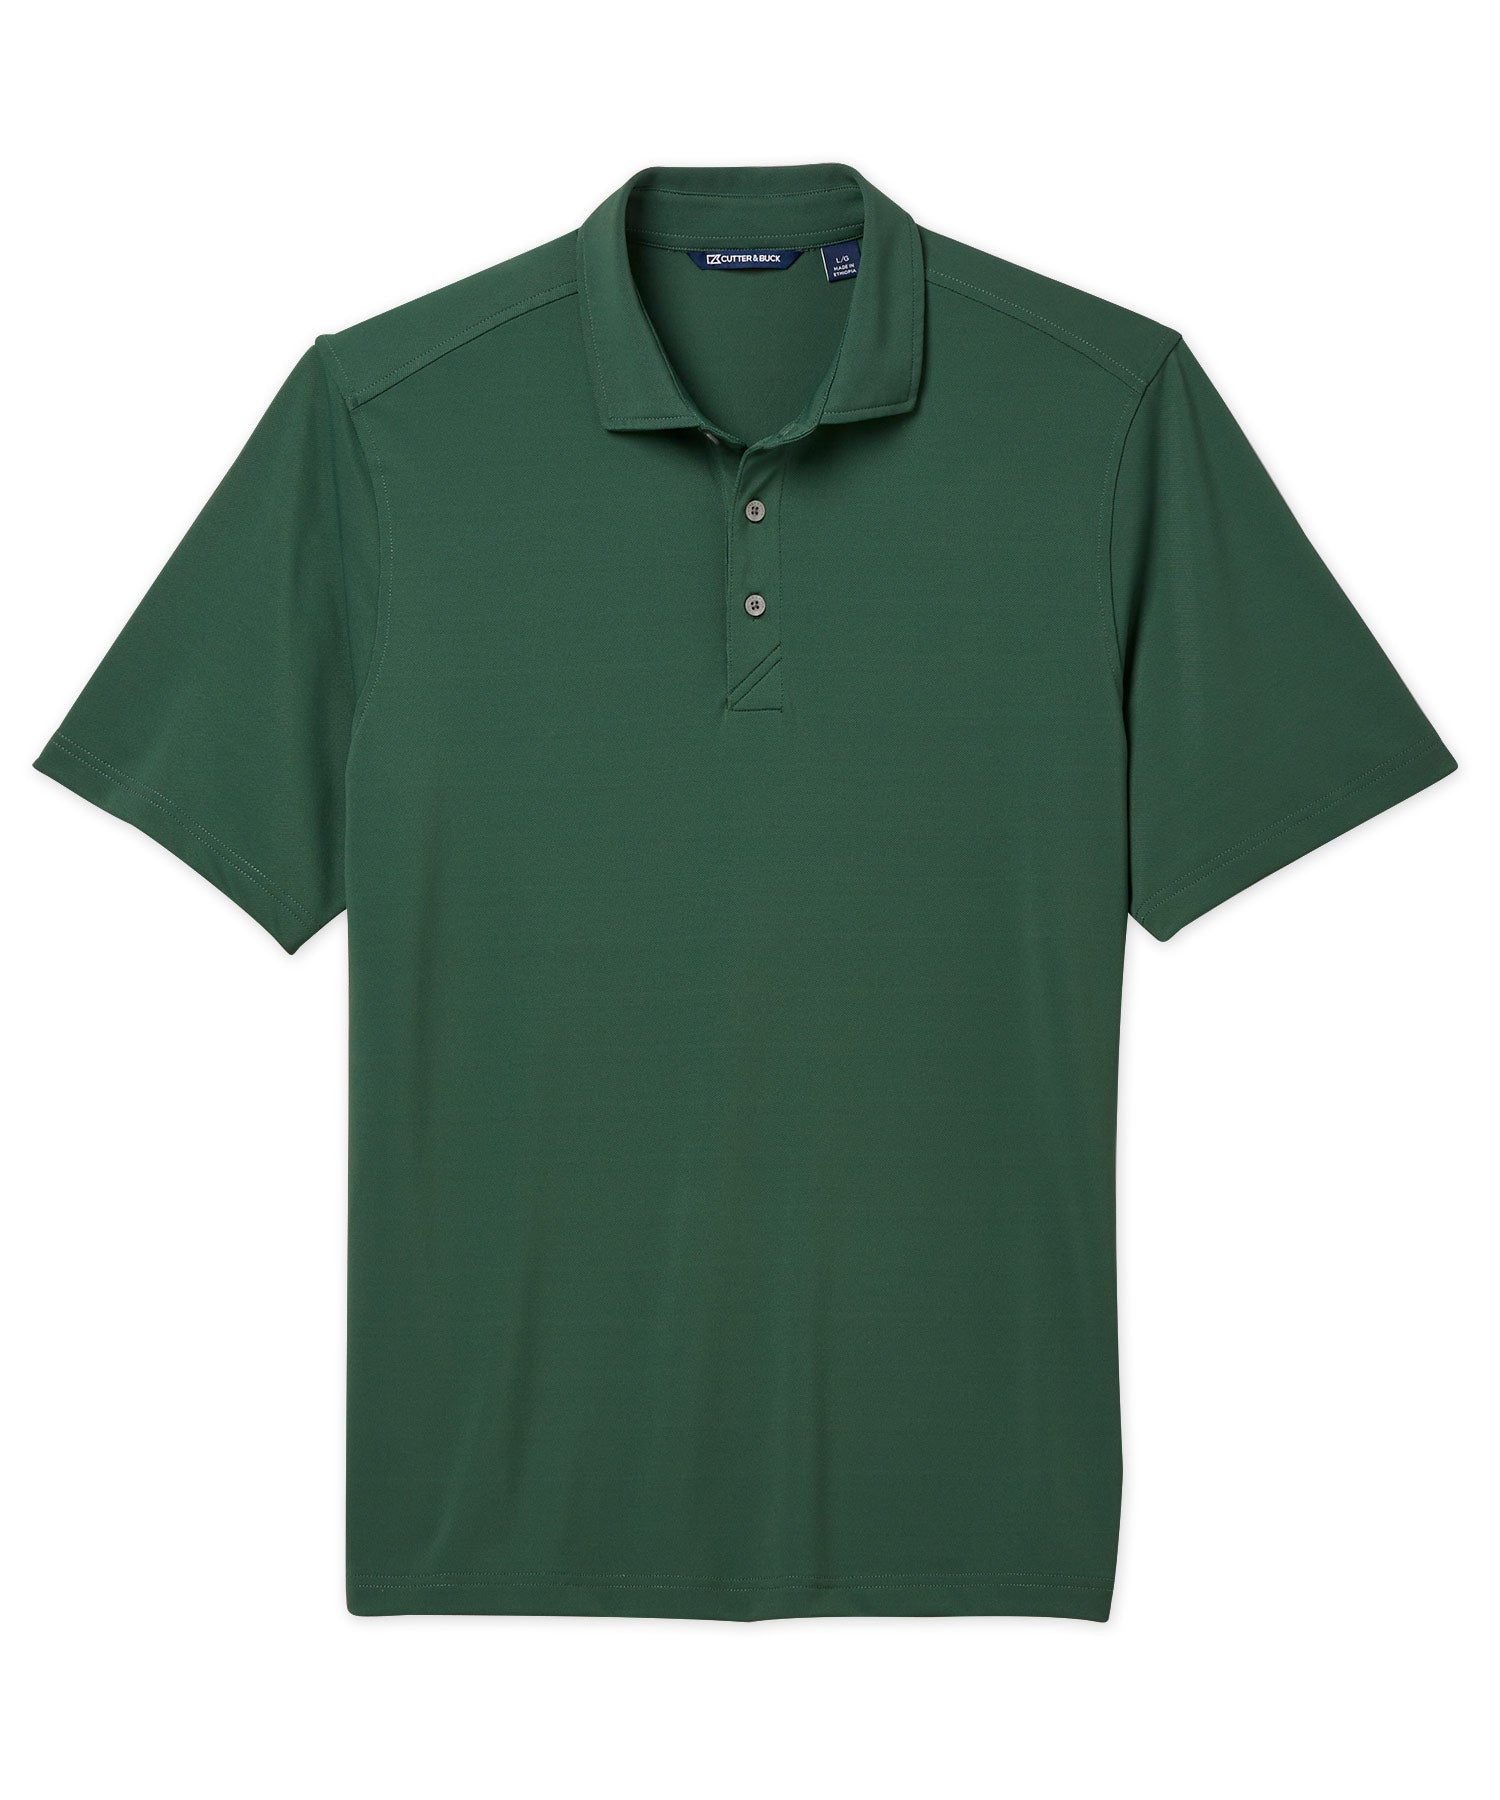 Cutter & Buck Short Sleeve Virtue Eco Pique Recycled Polo, Men's Big & Tall